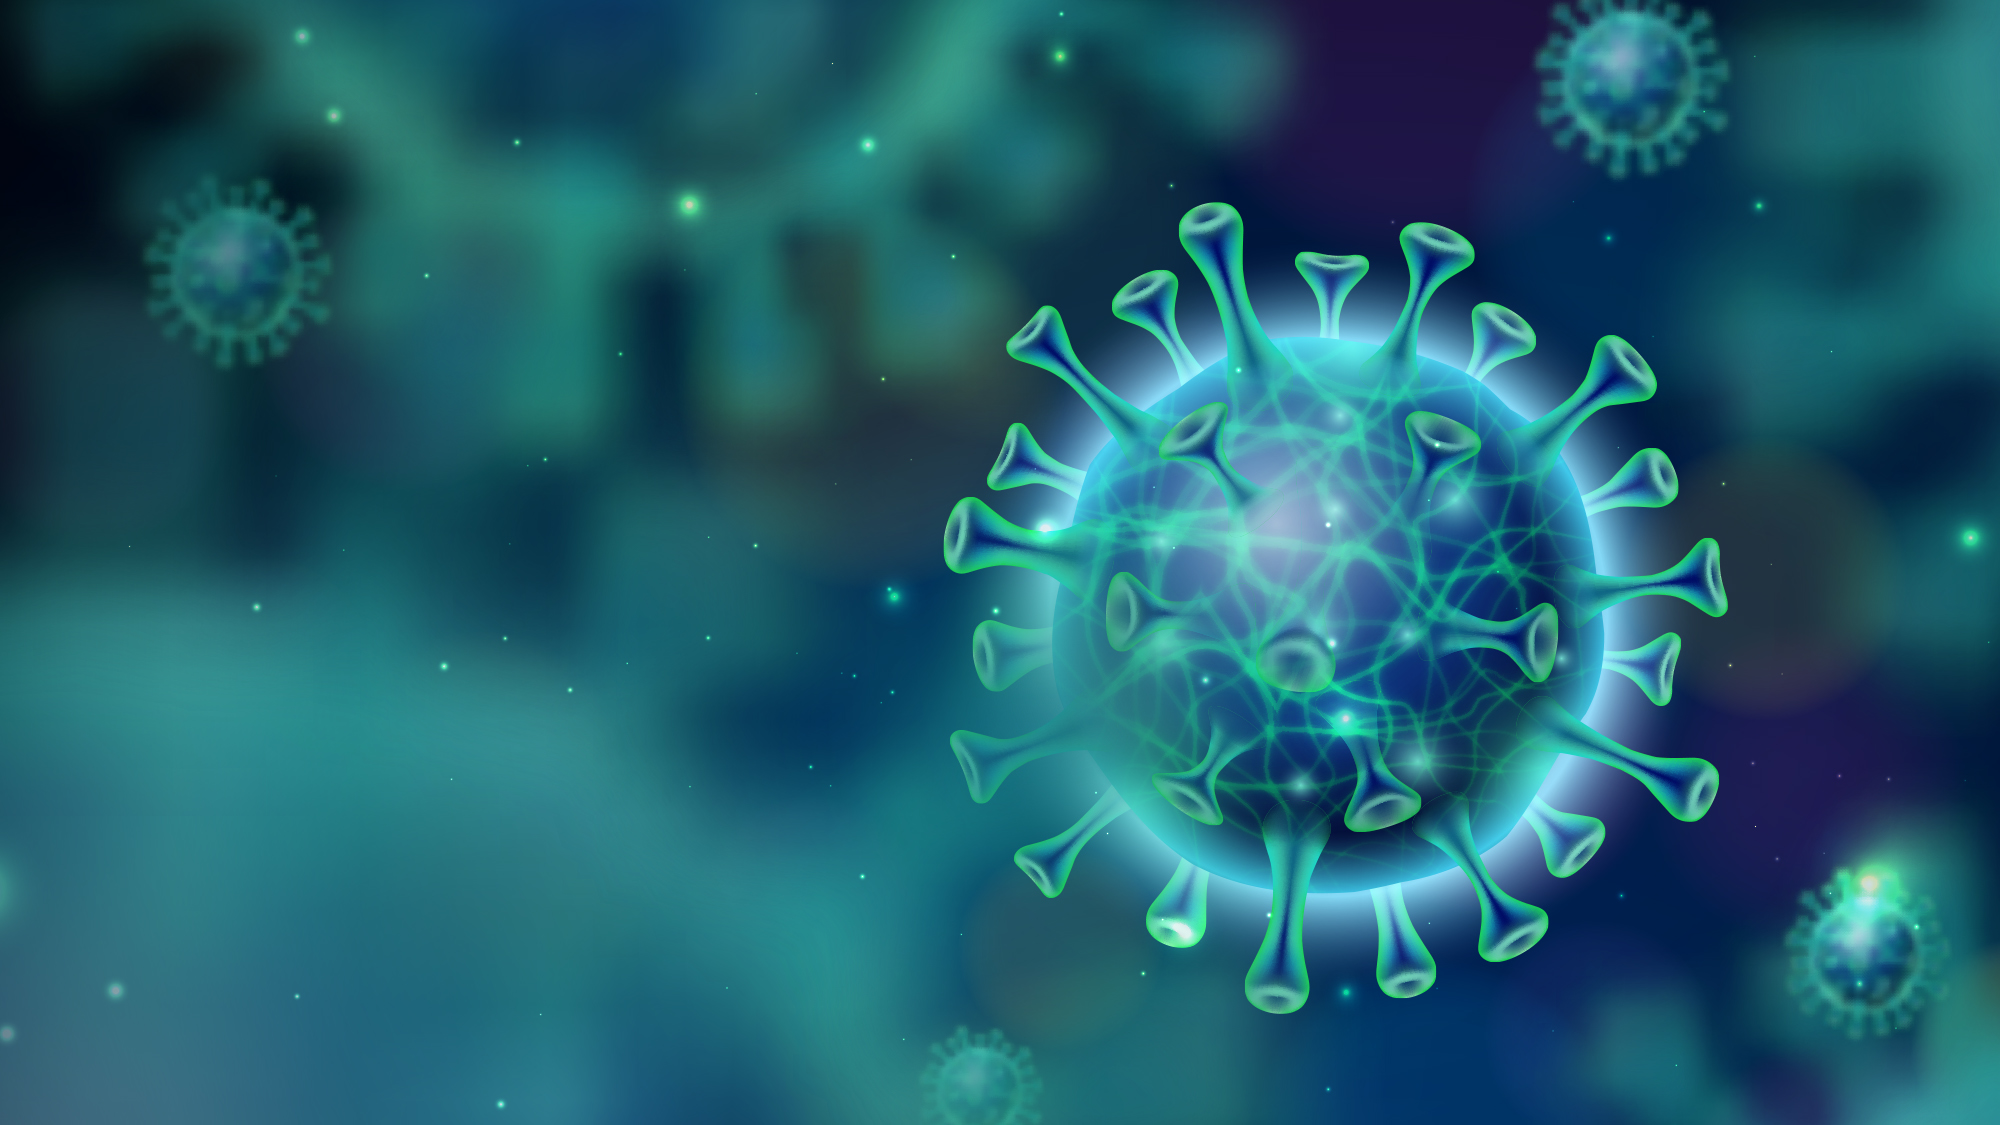 artistic depiction of a virus